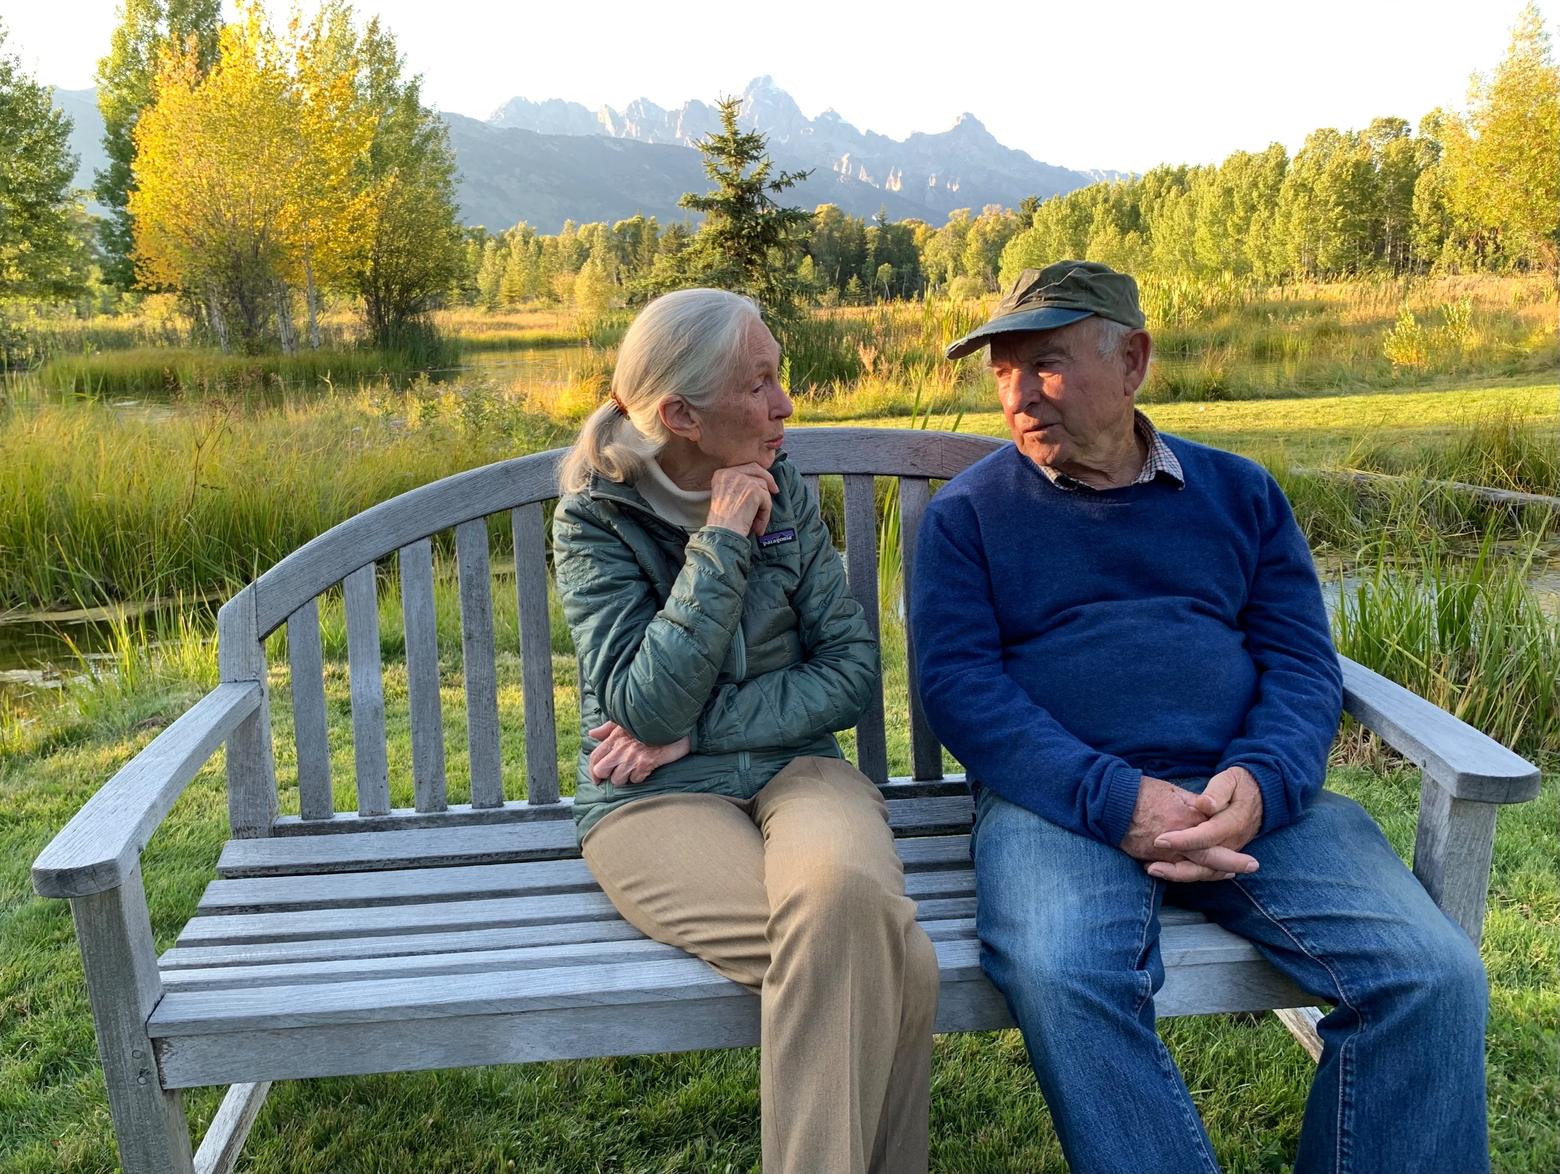 Friends with vision having a chat in the Tetons: Jane Goodall and Yvon Chouinard. Jackson Hole has become a springboard not only for the American conservation ethic that shines brightly in Greater Yellowstone, but it inspires Goodall and Chouinard to confront global environmental challenges with the best way they know—leading by example. Photo by Todd Wilkinson